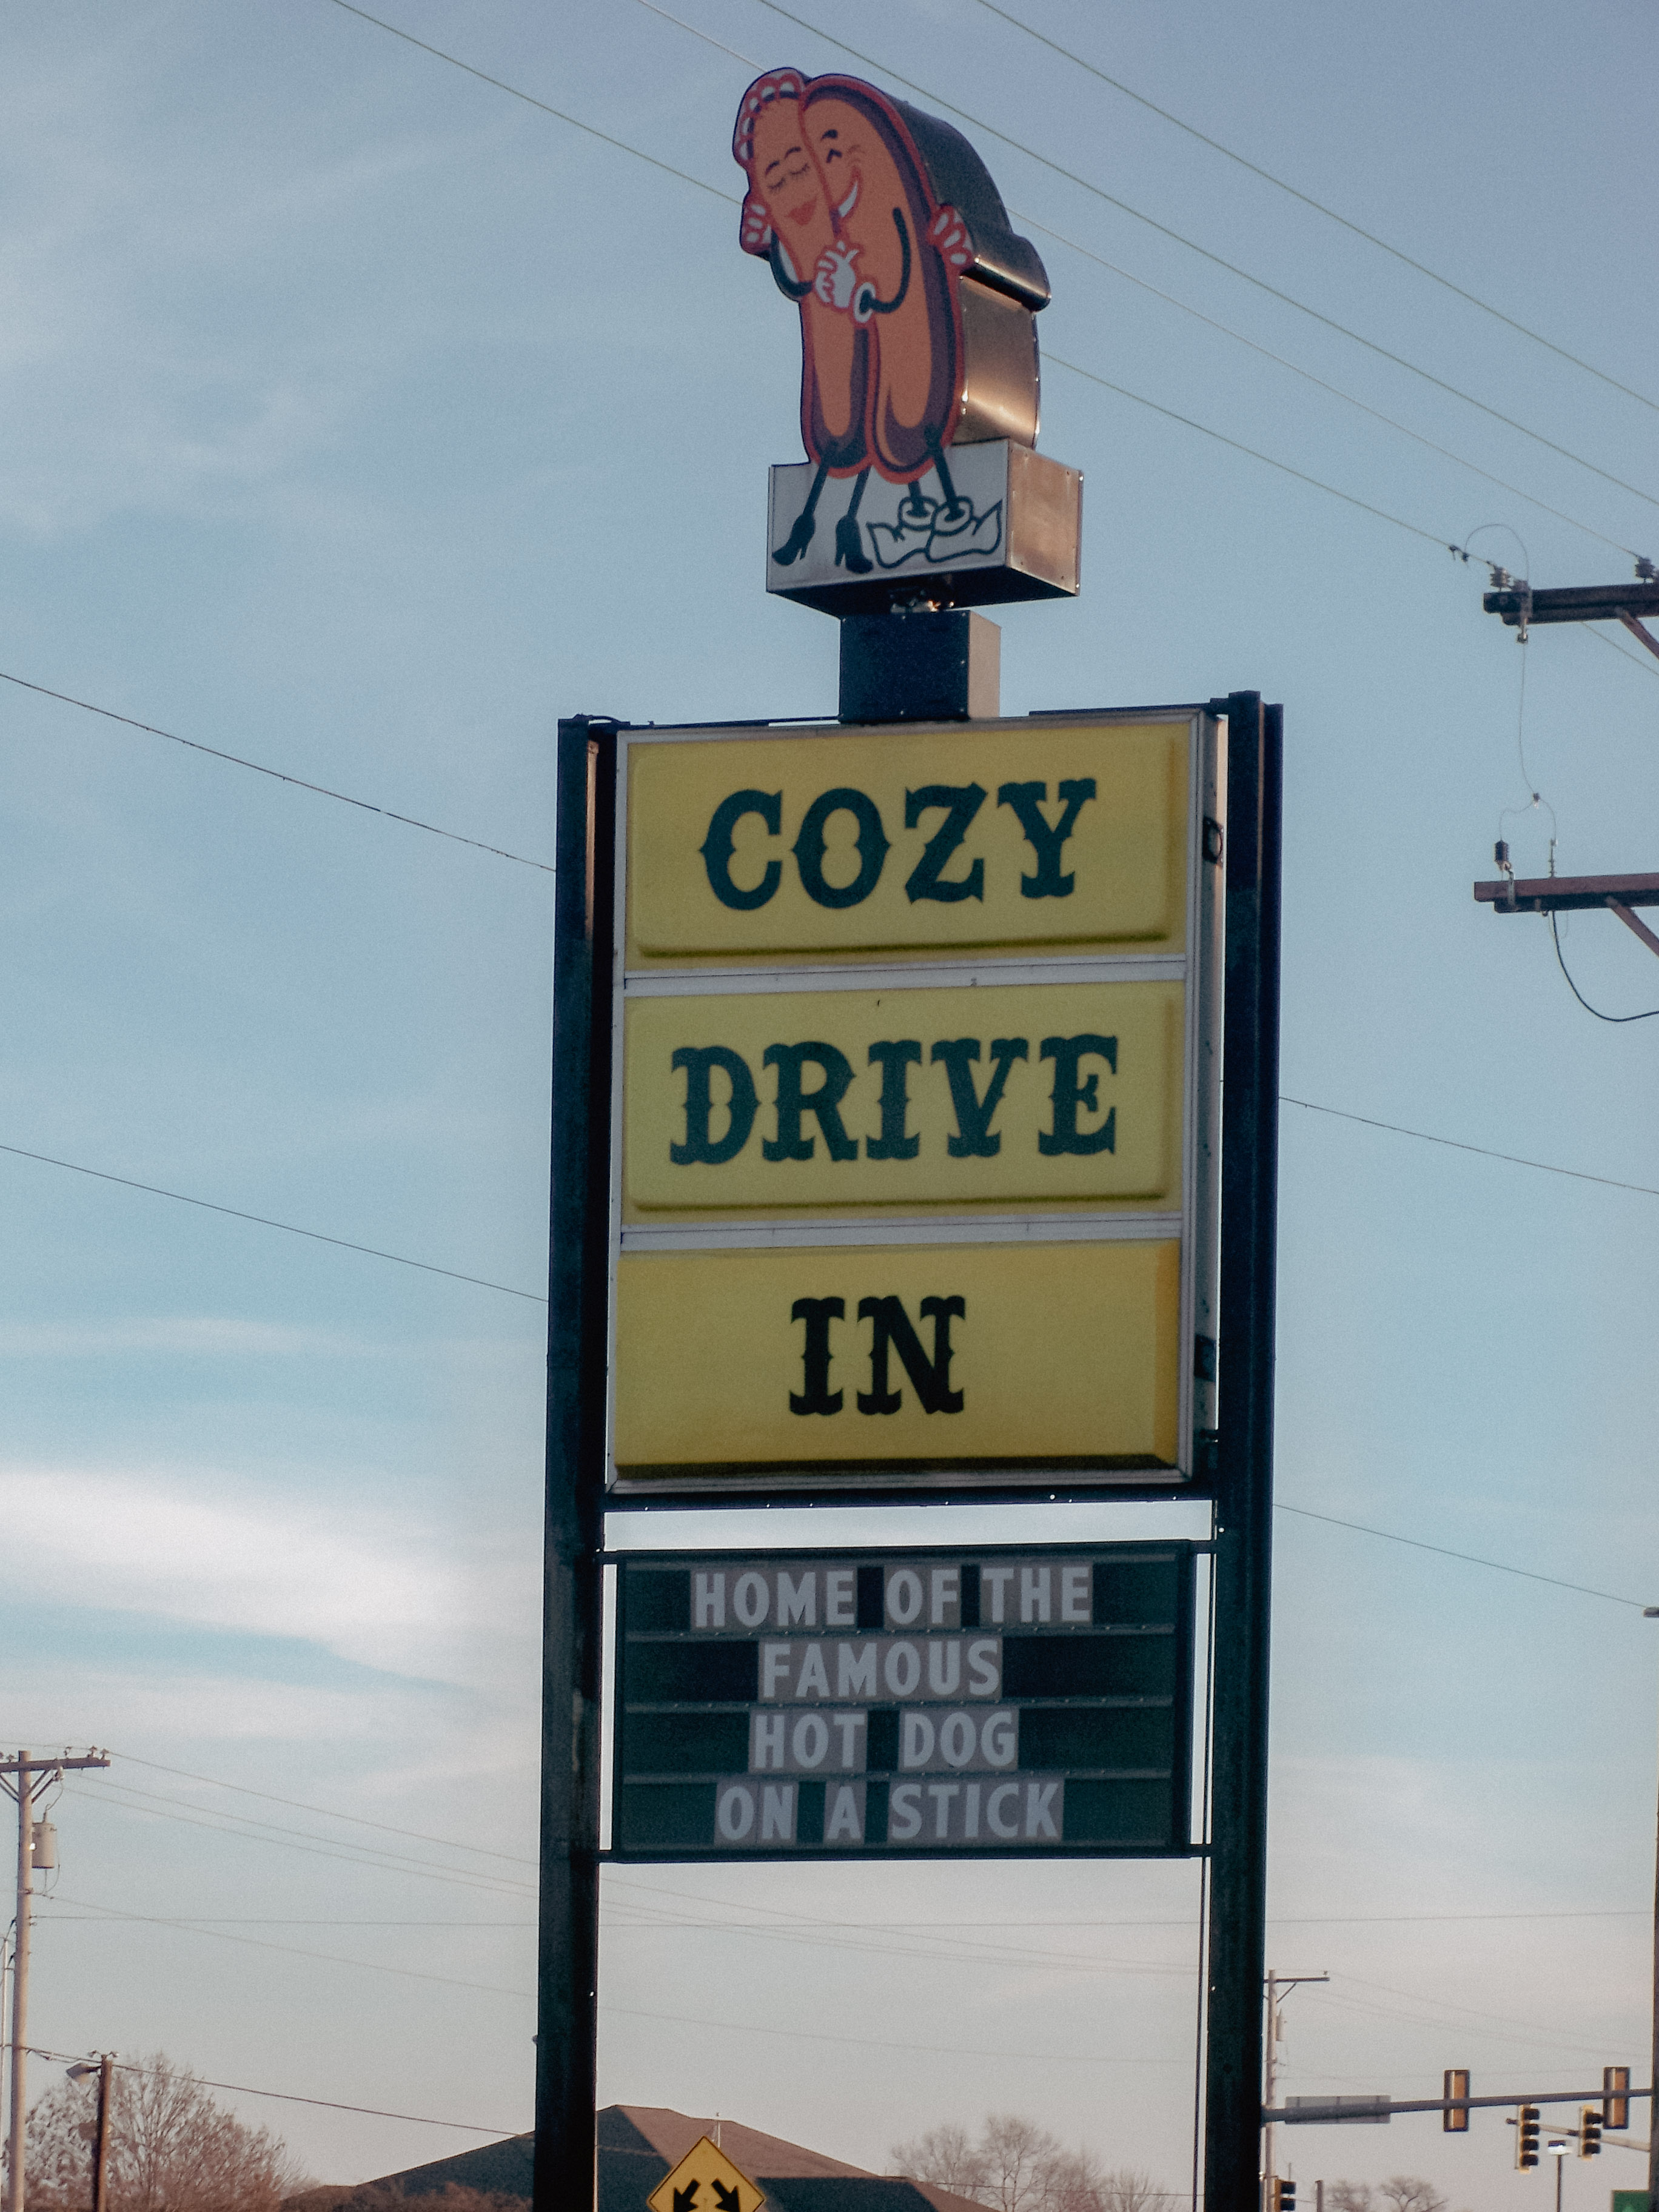 Cozy Dog Drive In created the Corn Dog in Sprinfield Illinois